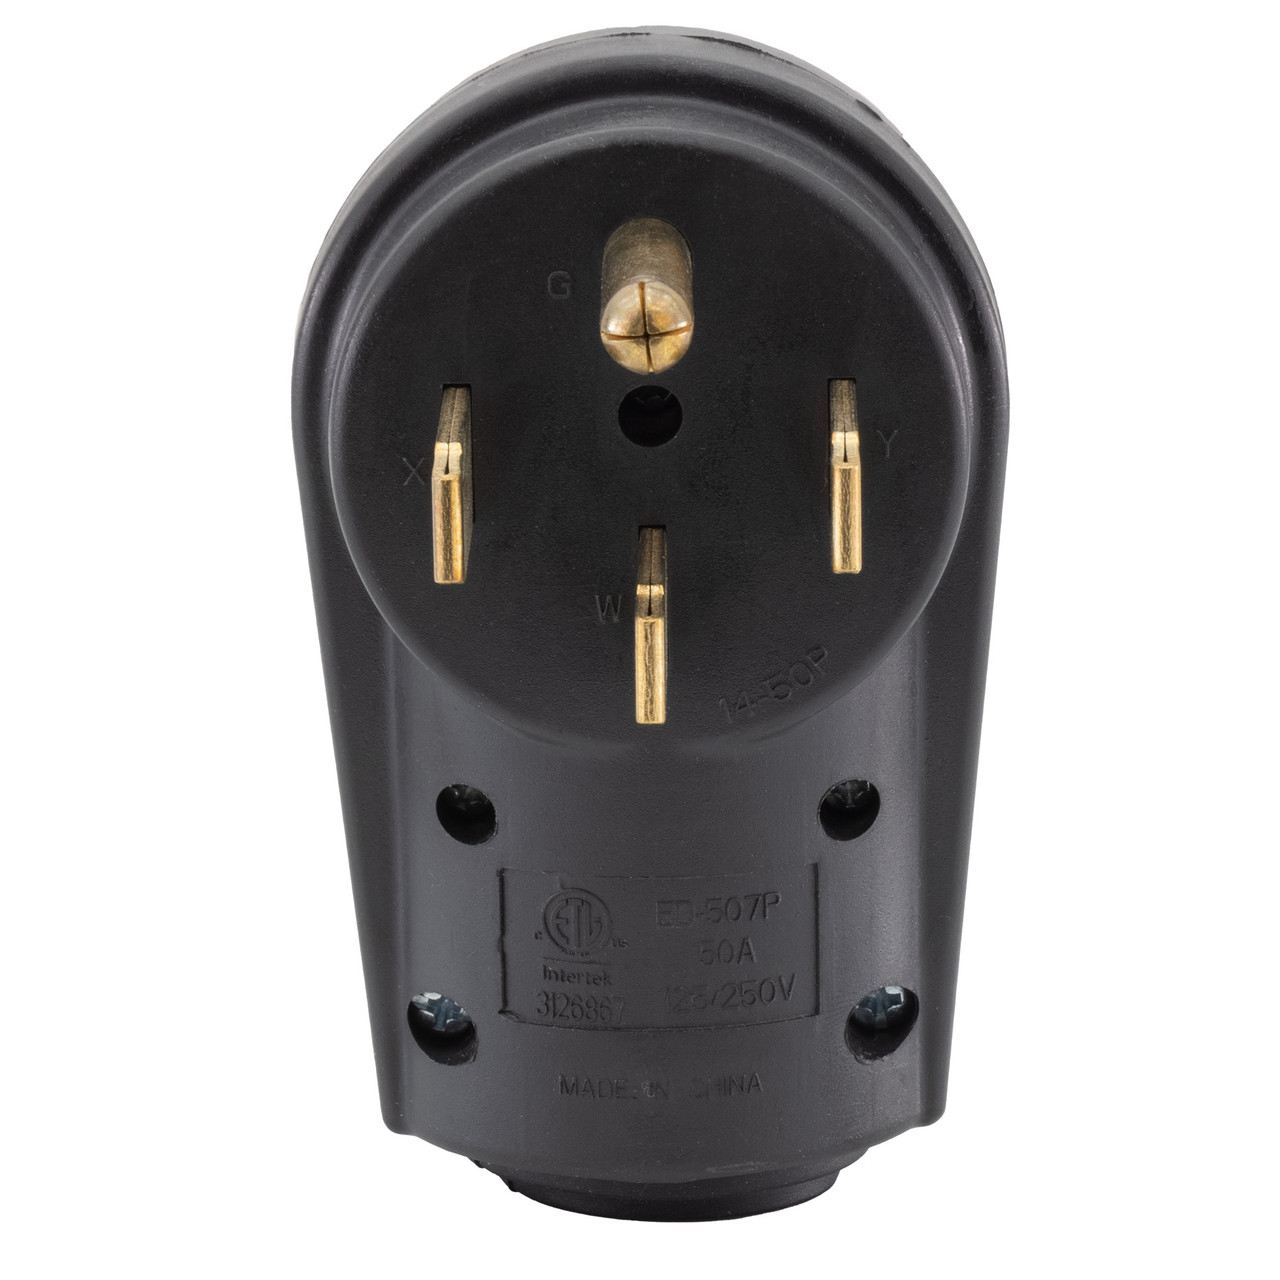 30 Amp RV Plug Replacement Male - RecPro